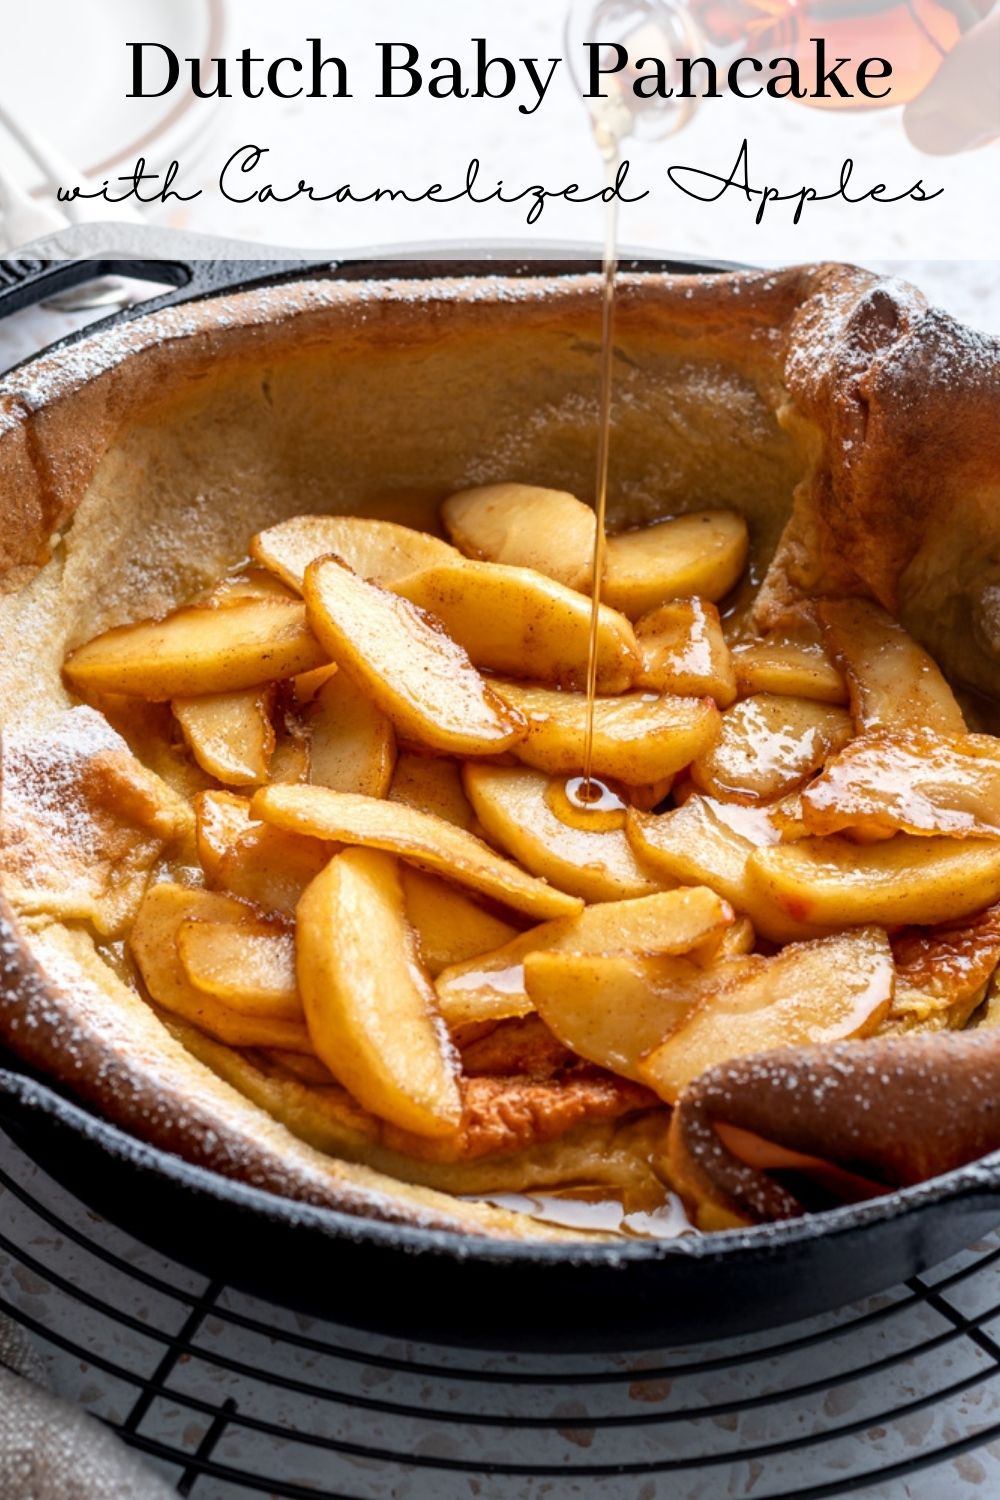 Dutch Baby Pancake with Caramelized Apples